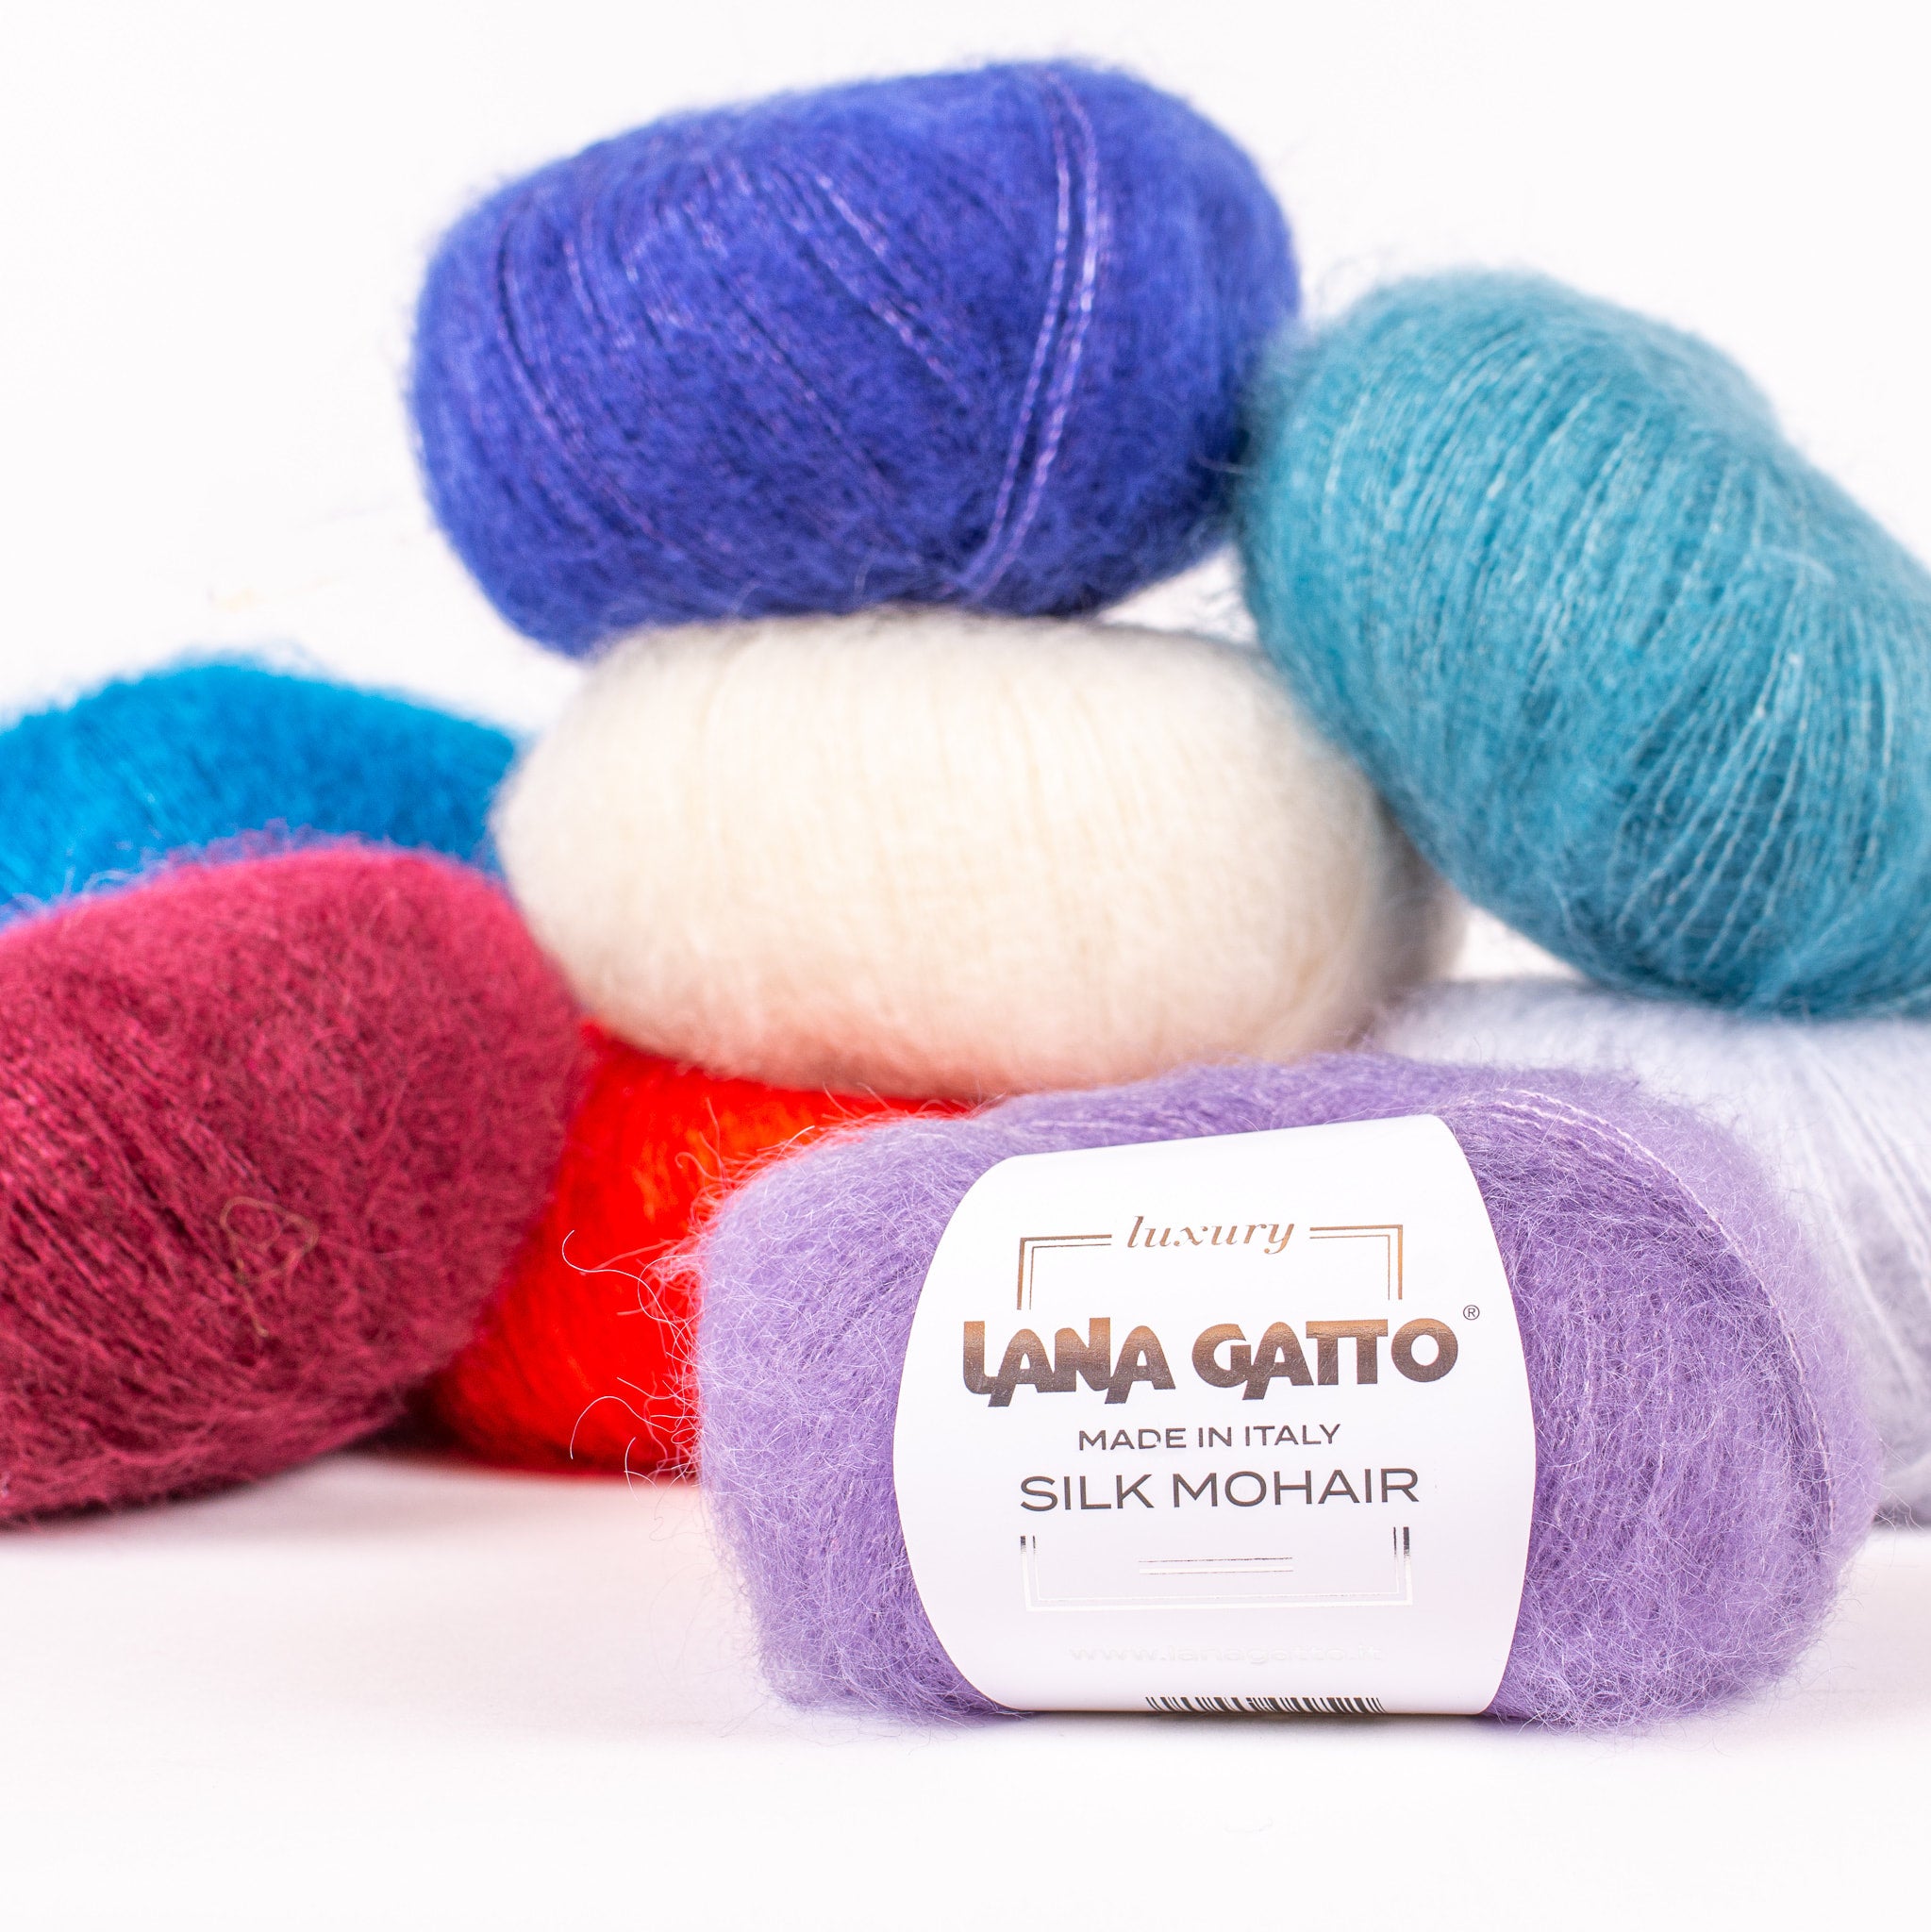 Clearance Yarn & Wool, Tracked and Express Delivery Options Available